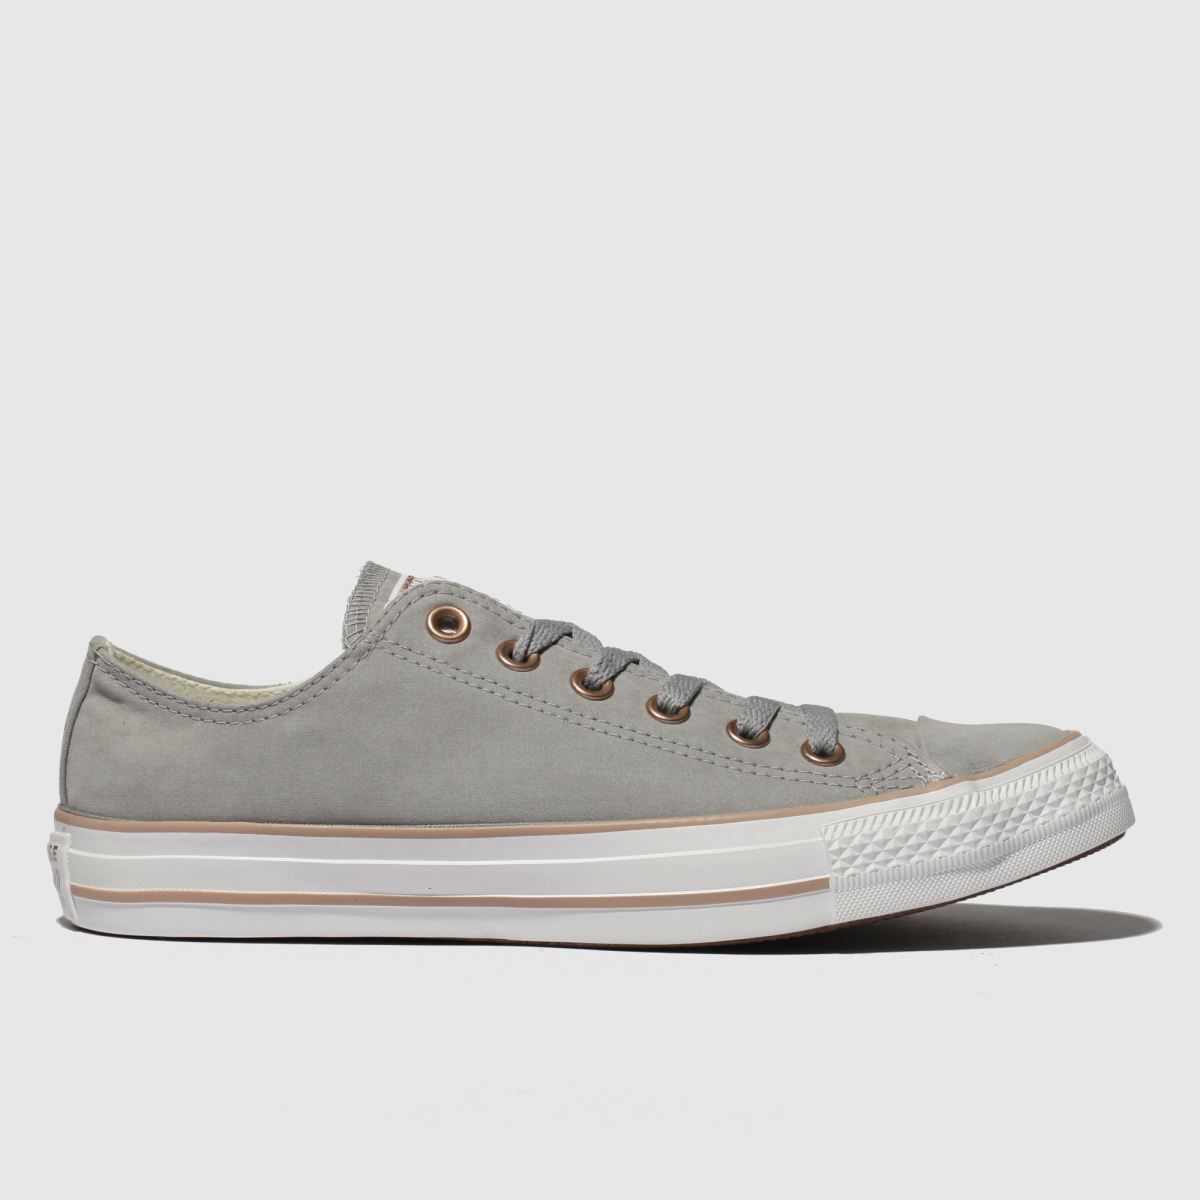 converse khaki all star peached ox trainers